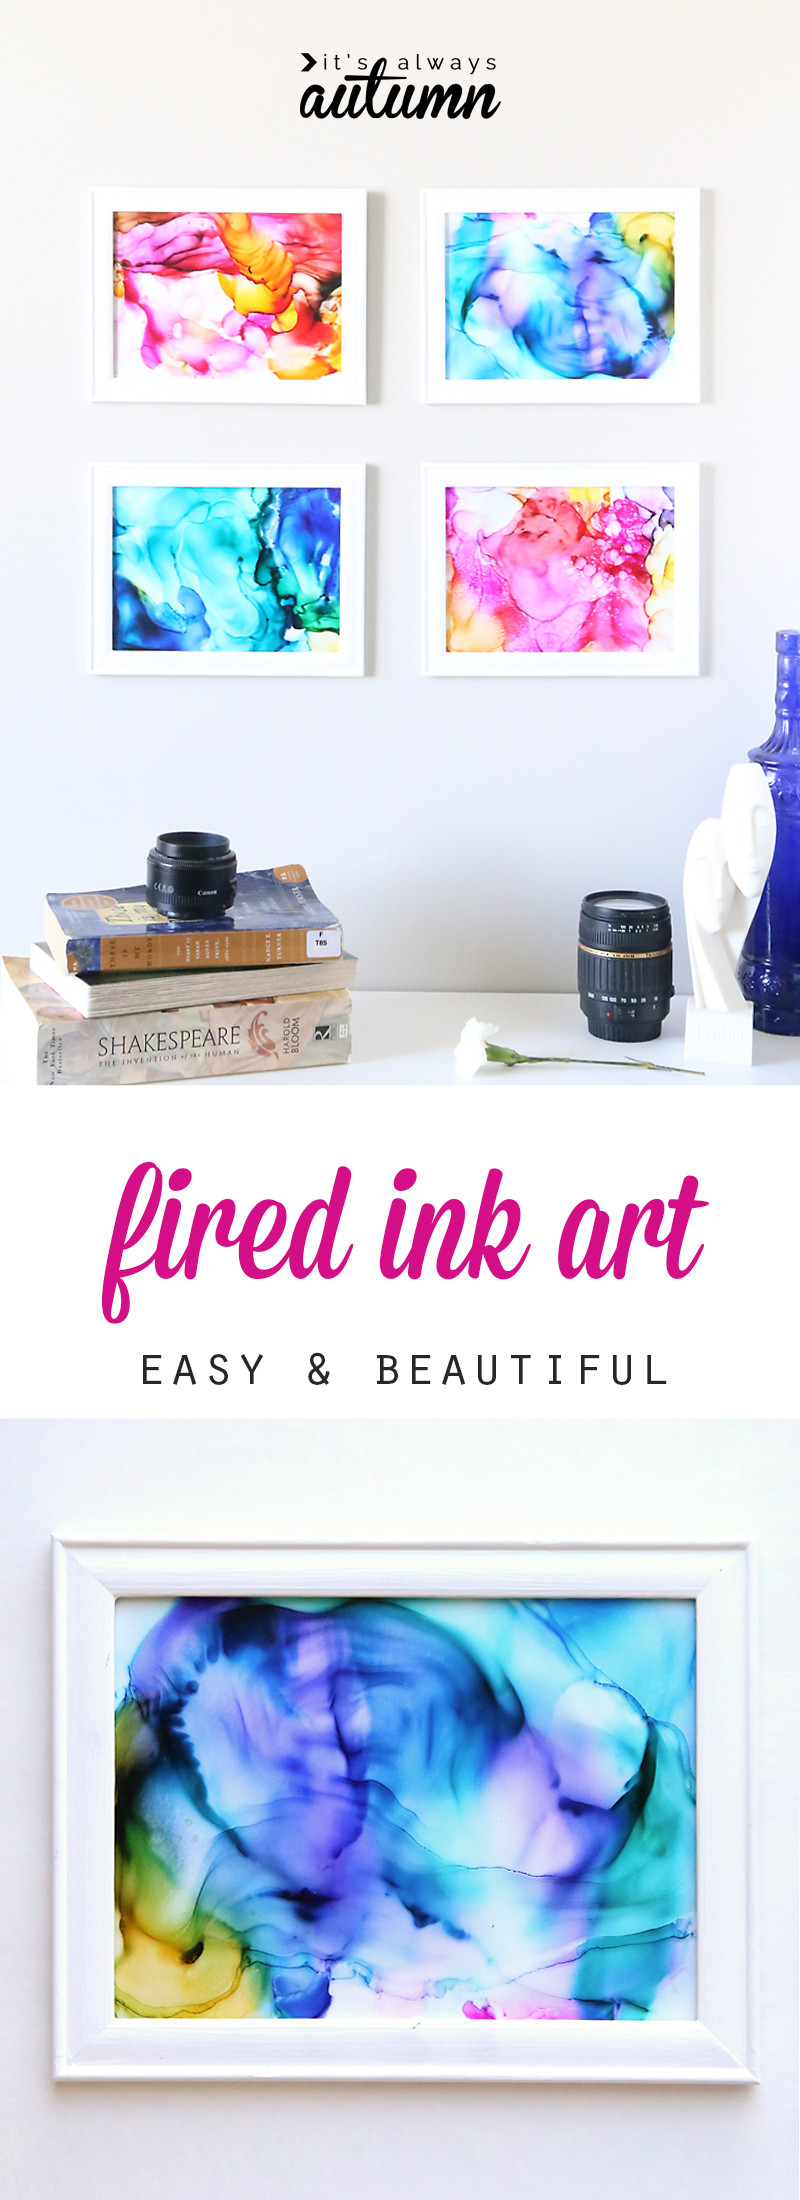 Easy Summer Crafts For Adults
 fired ink art